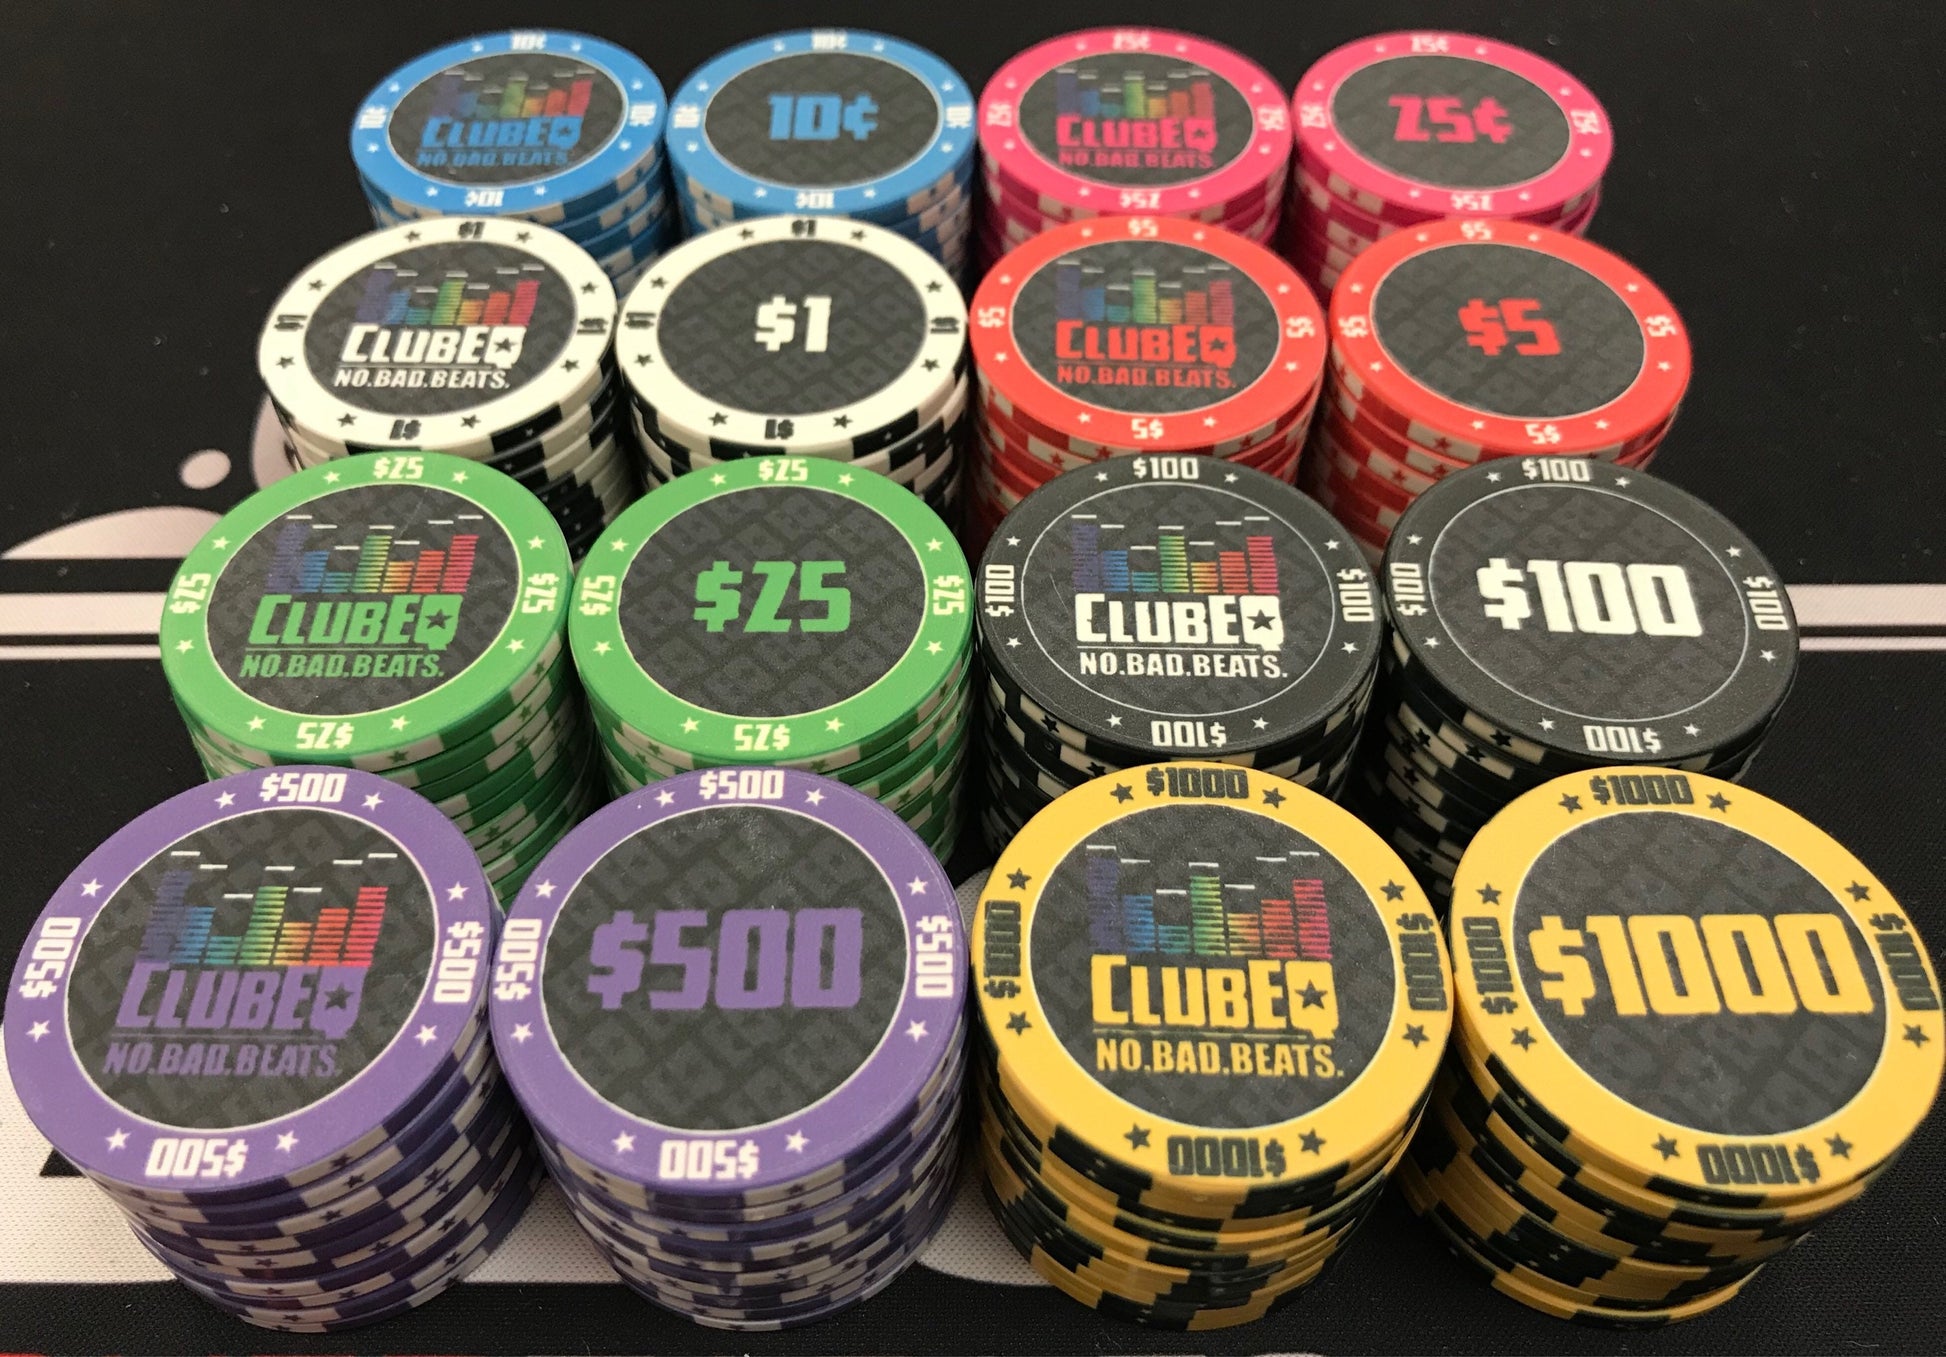 Both faces of each ClubEQ chip. Side 1 shows the ClubEQ logo. Side 2 shows the denomination. Stock colors/denominations are: blue 10¢, pink 25¢, white $1, red $5, green $25, black $100, purple $500, and yellow $1000. Full-color graphics on rolling edges.